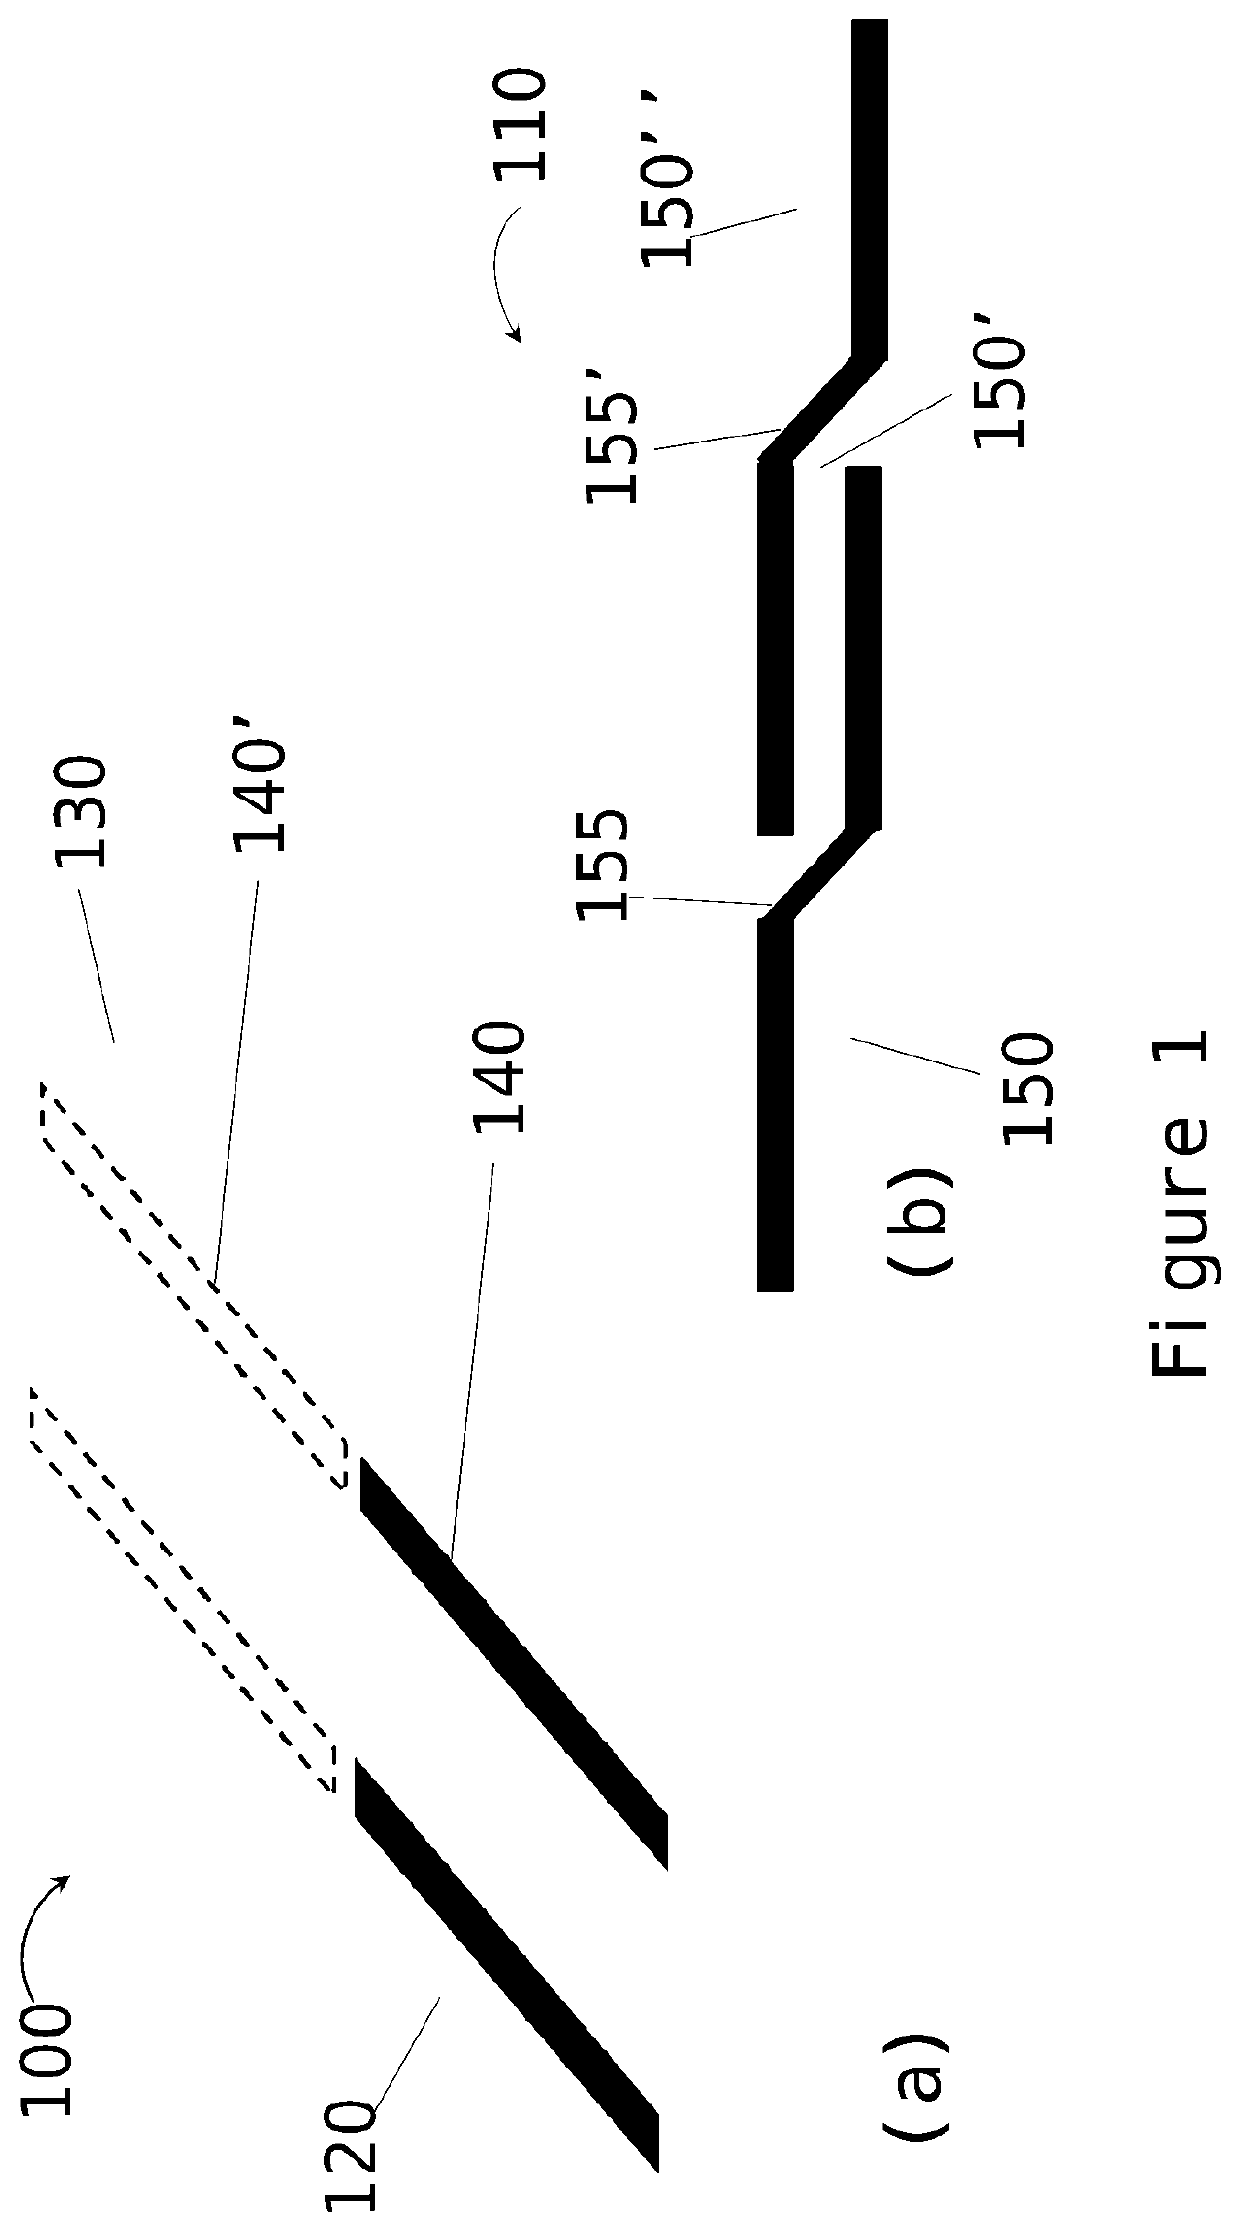 A method of forming a device structure